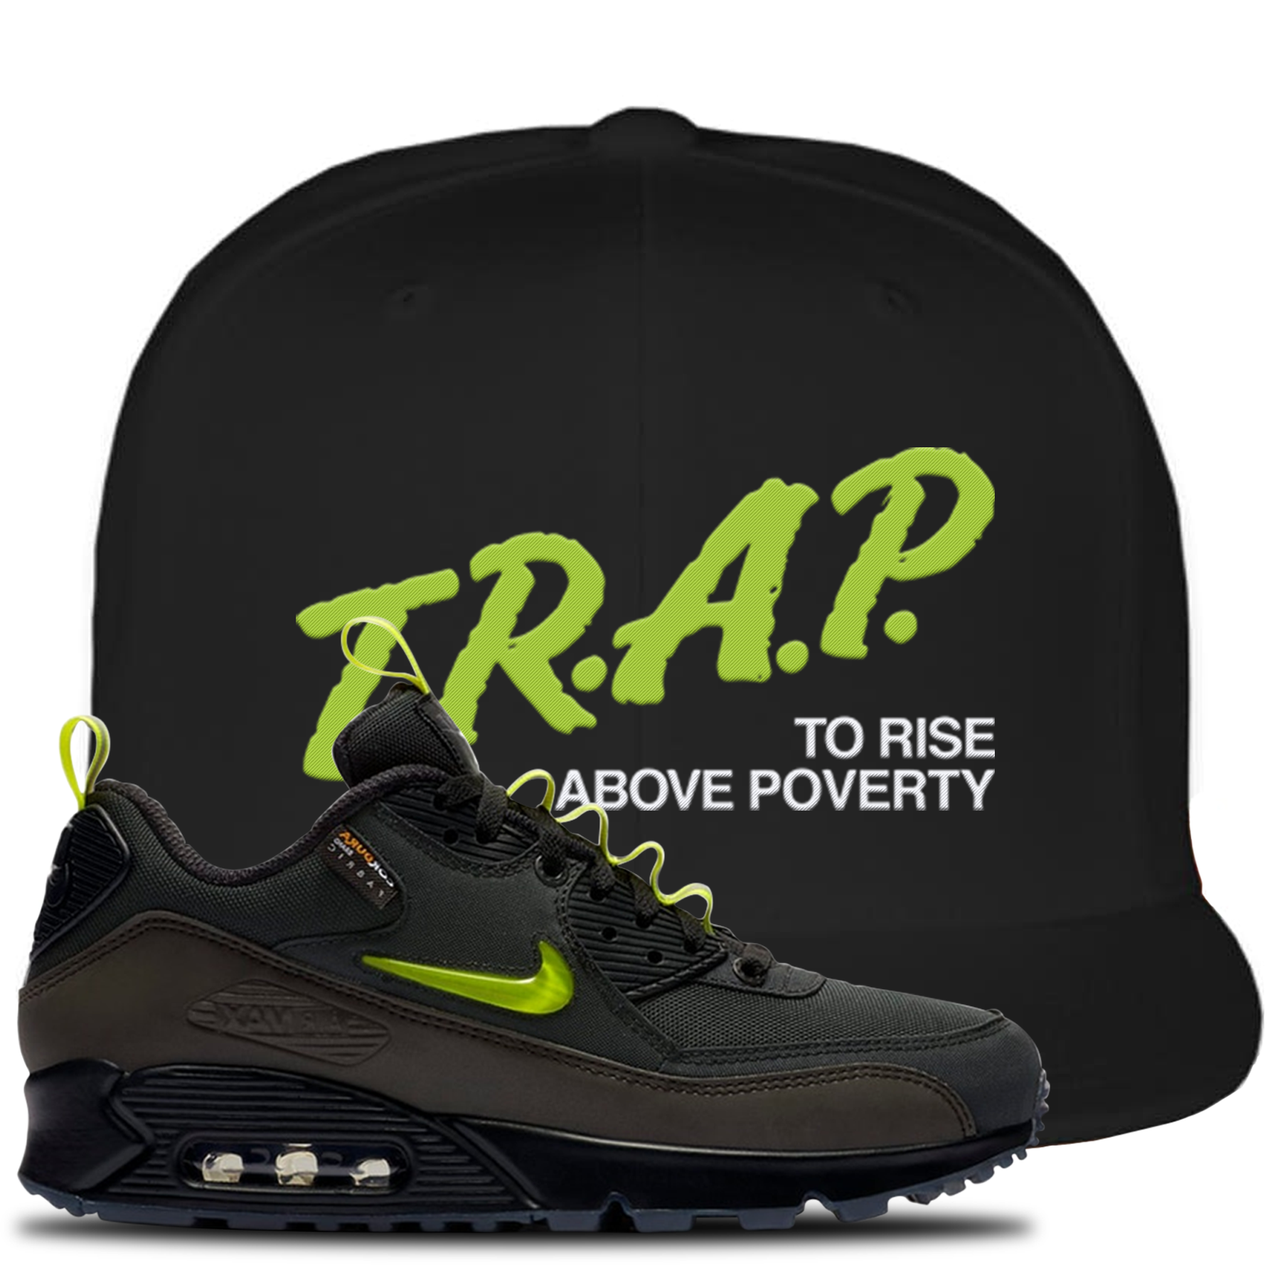 The Basement X Air Max 90 Manchester Trap to Rise Above Poverty Black Sneaker Hook Up Snapback Hat